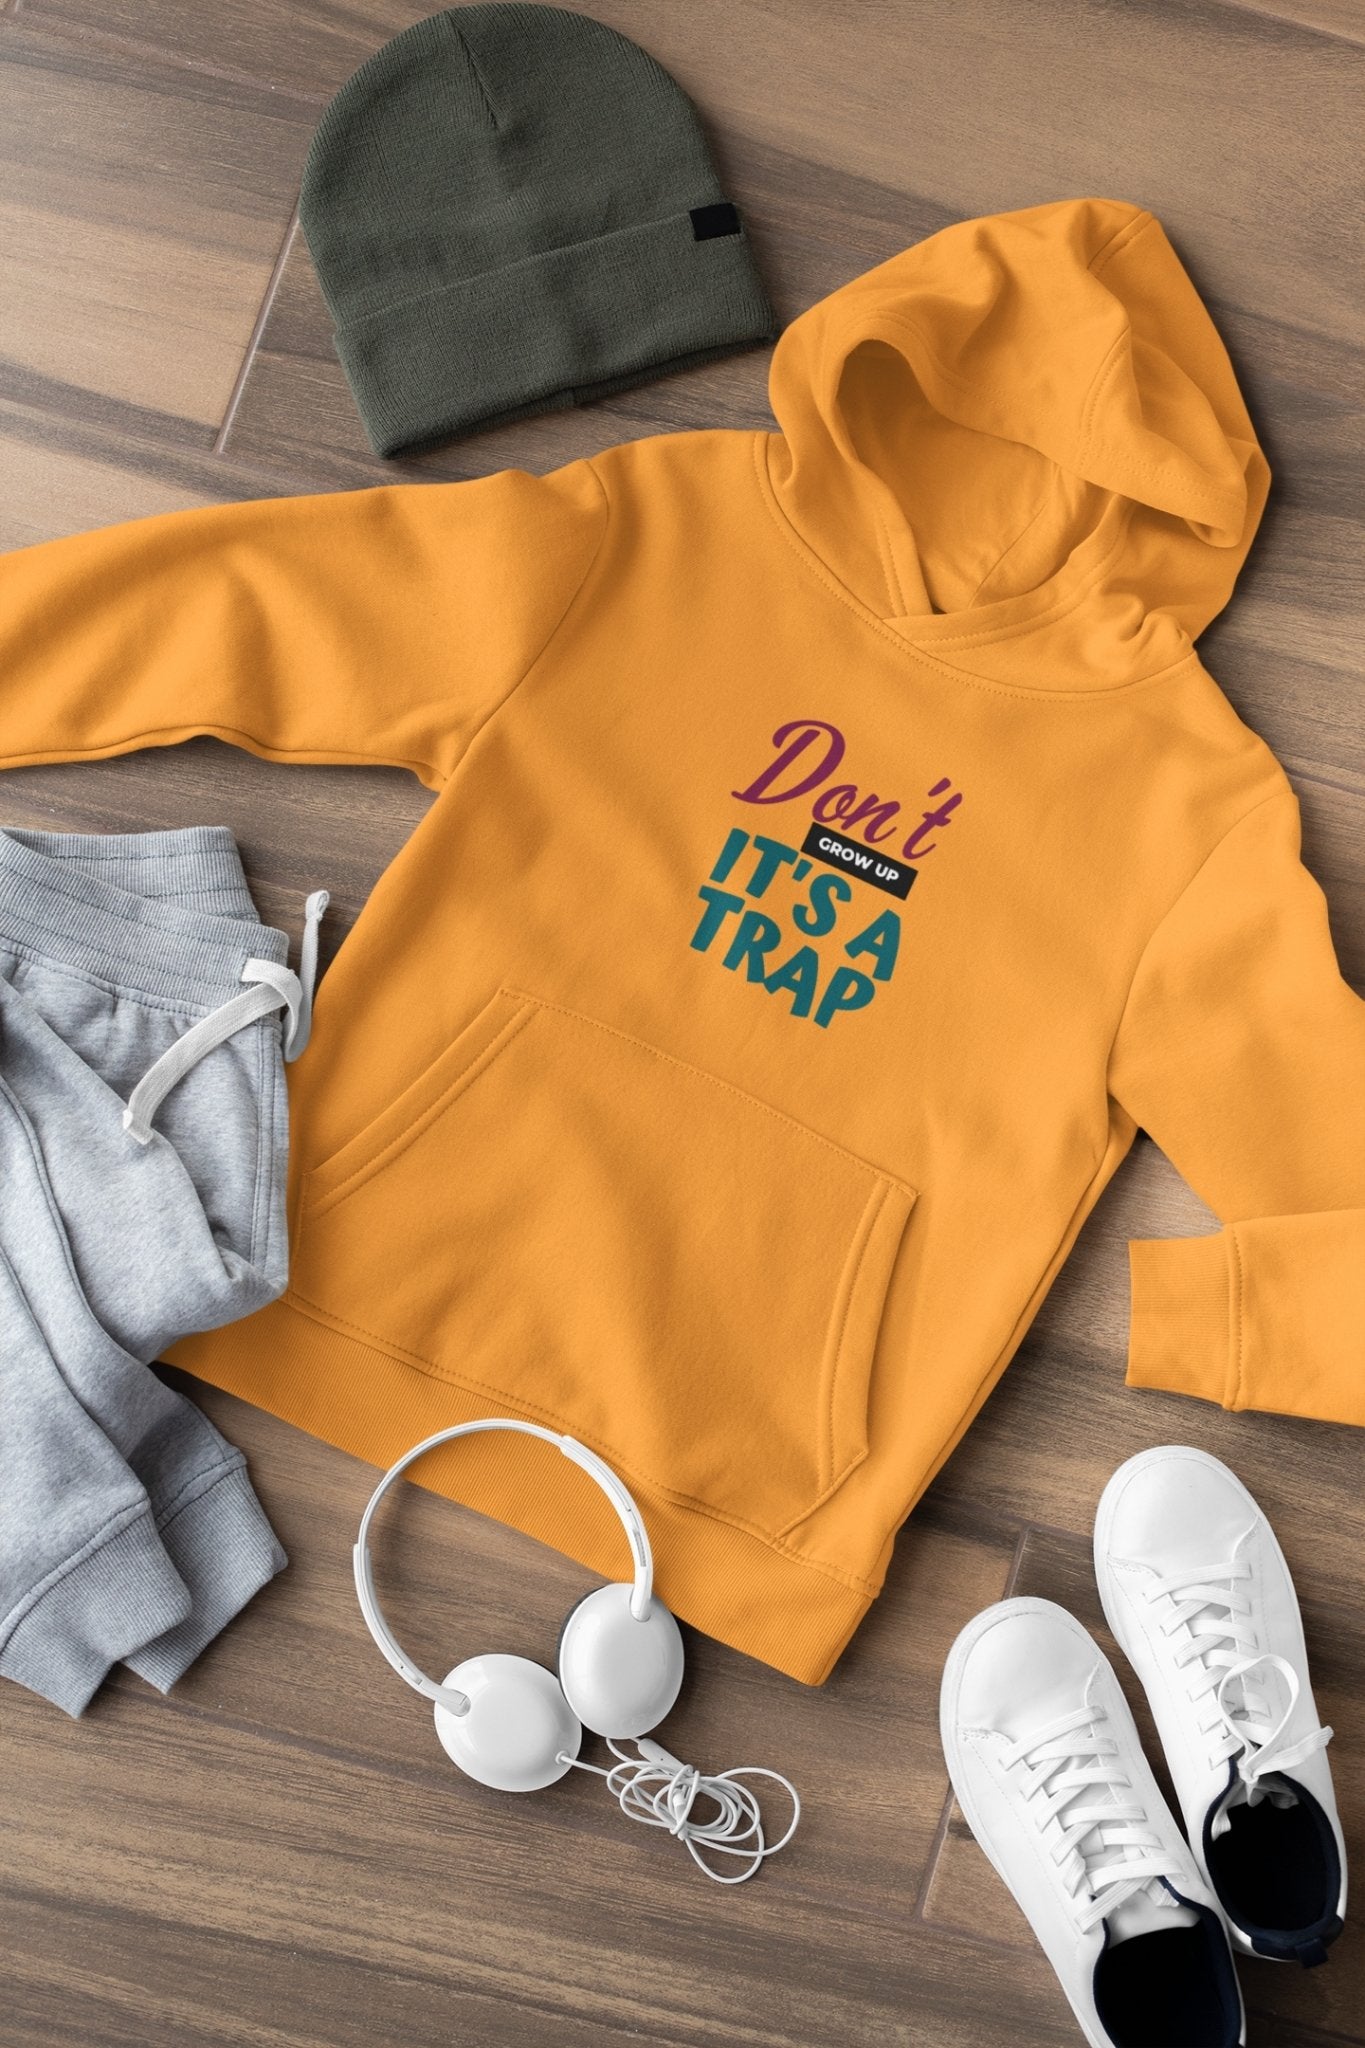 Dont Grow Up Its a Trap Typography Men Hoodies-FunkyTeesClub - Funky Tees Club